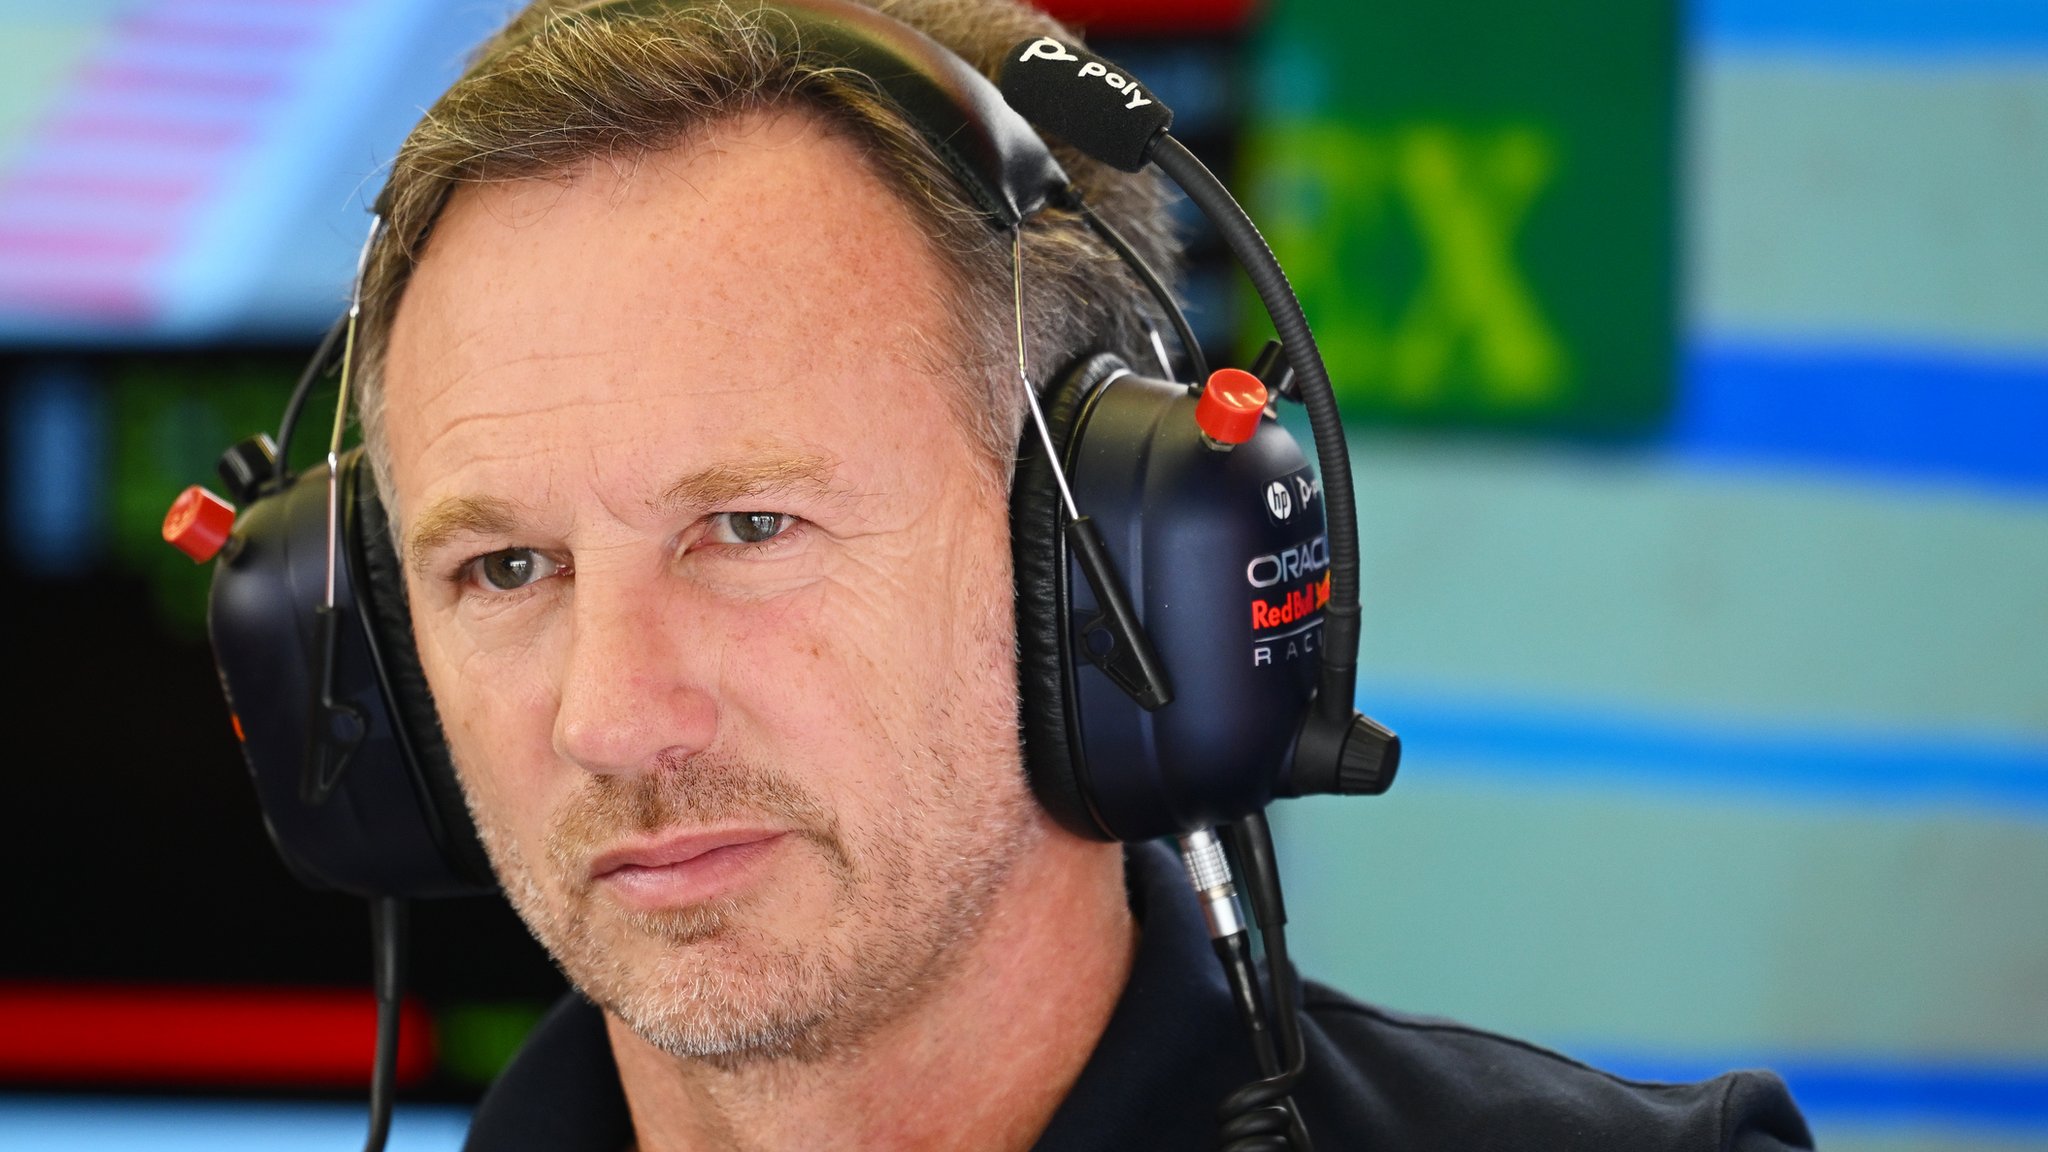 Christian Horner allegations: Red Bull team principal cleared of inappropriate behaviour